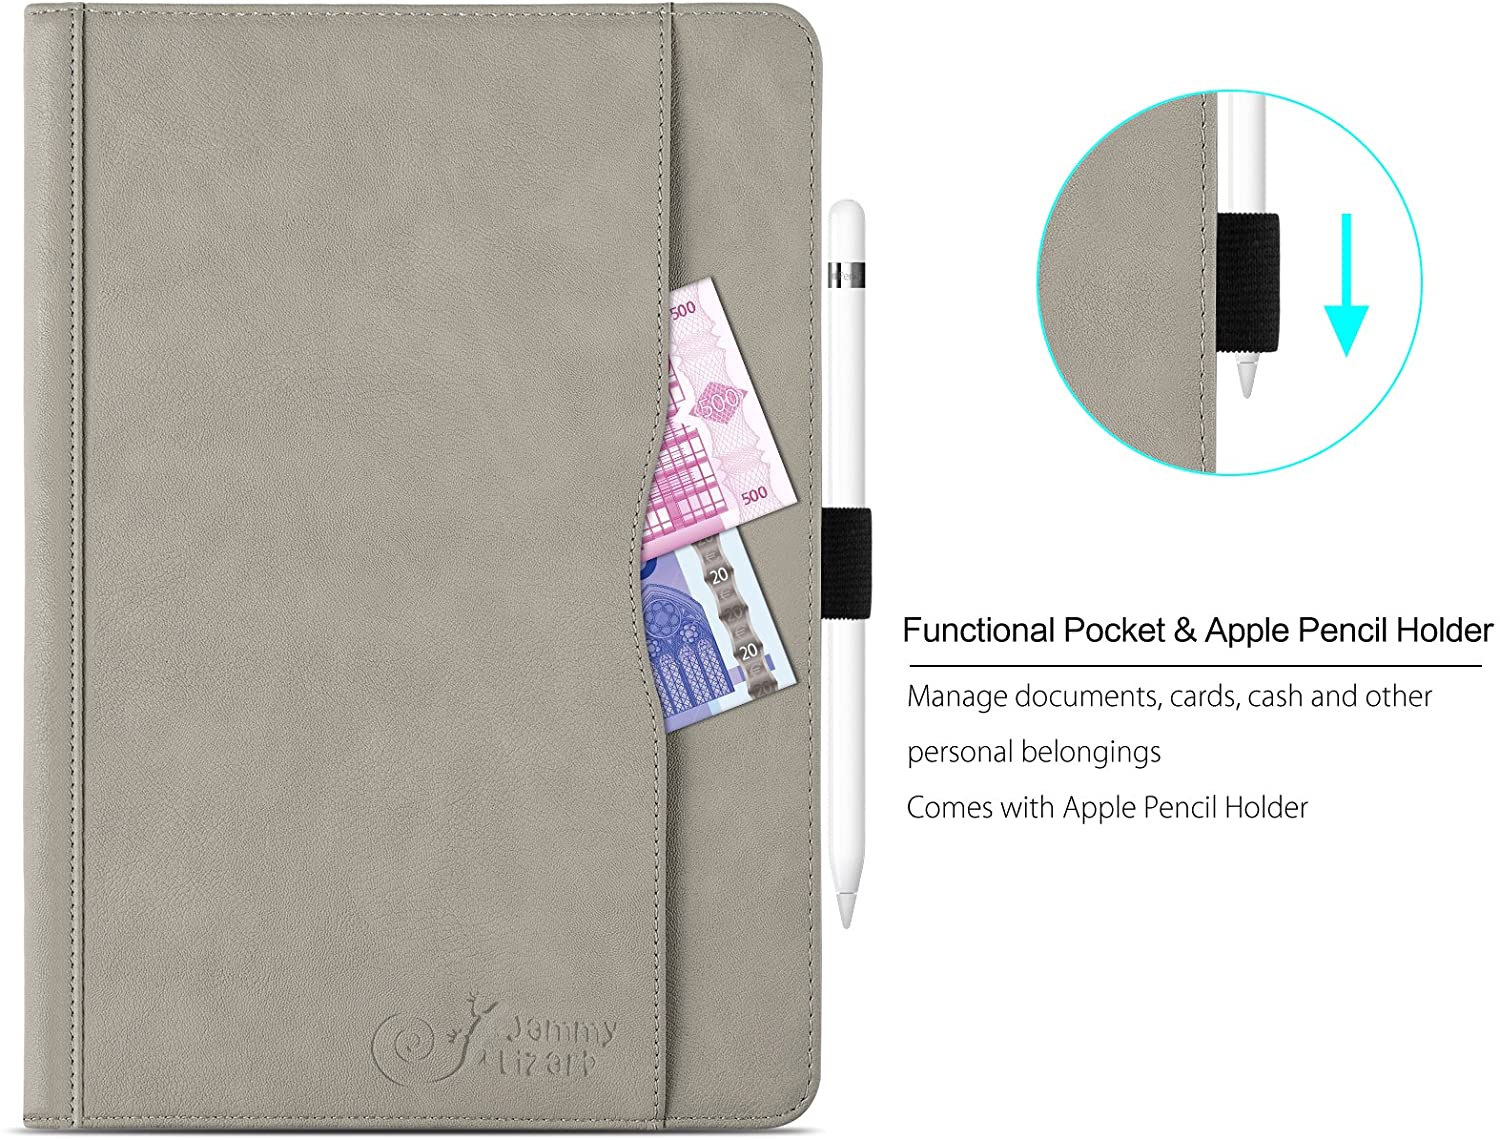 iPad Pro 10.5 Case - The Original White Leather Smart Cover for iPad Pro 10.5" (2017), with Pencil Holder & Stylus - e4cents